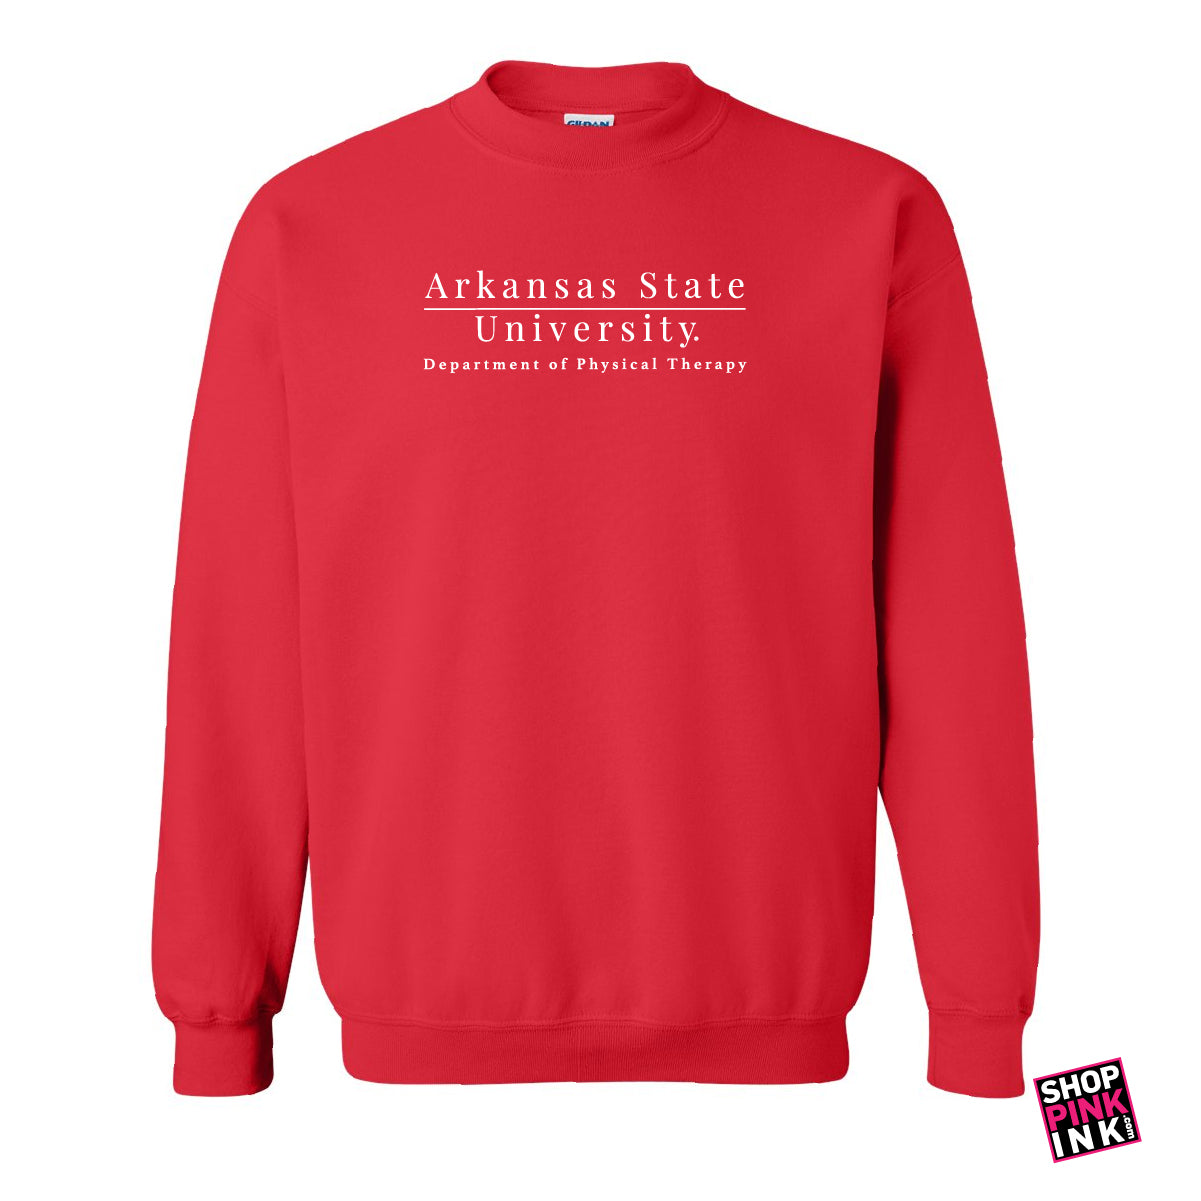 ASTATE - Department of Physical Therapy - Crewneck - 22007